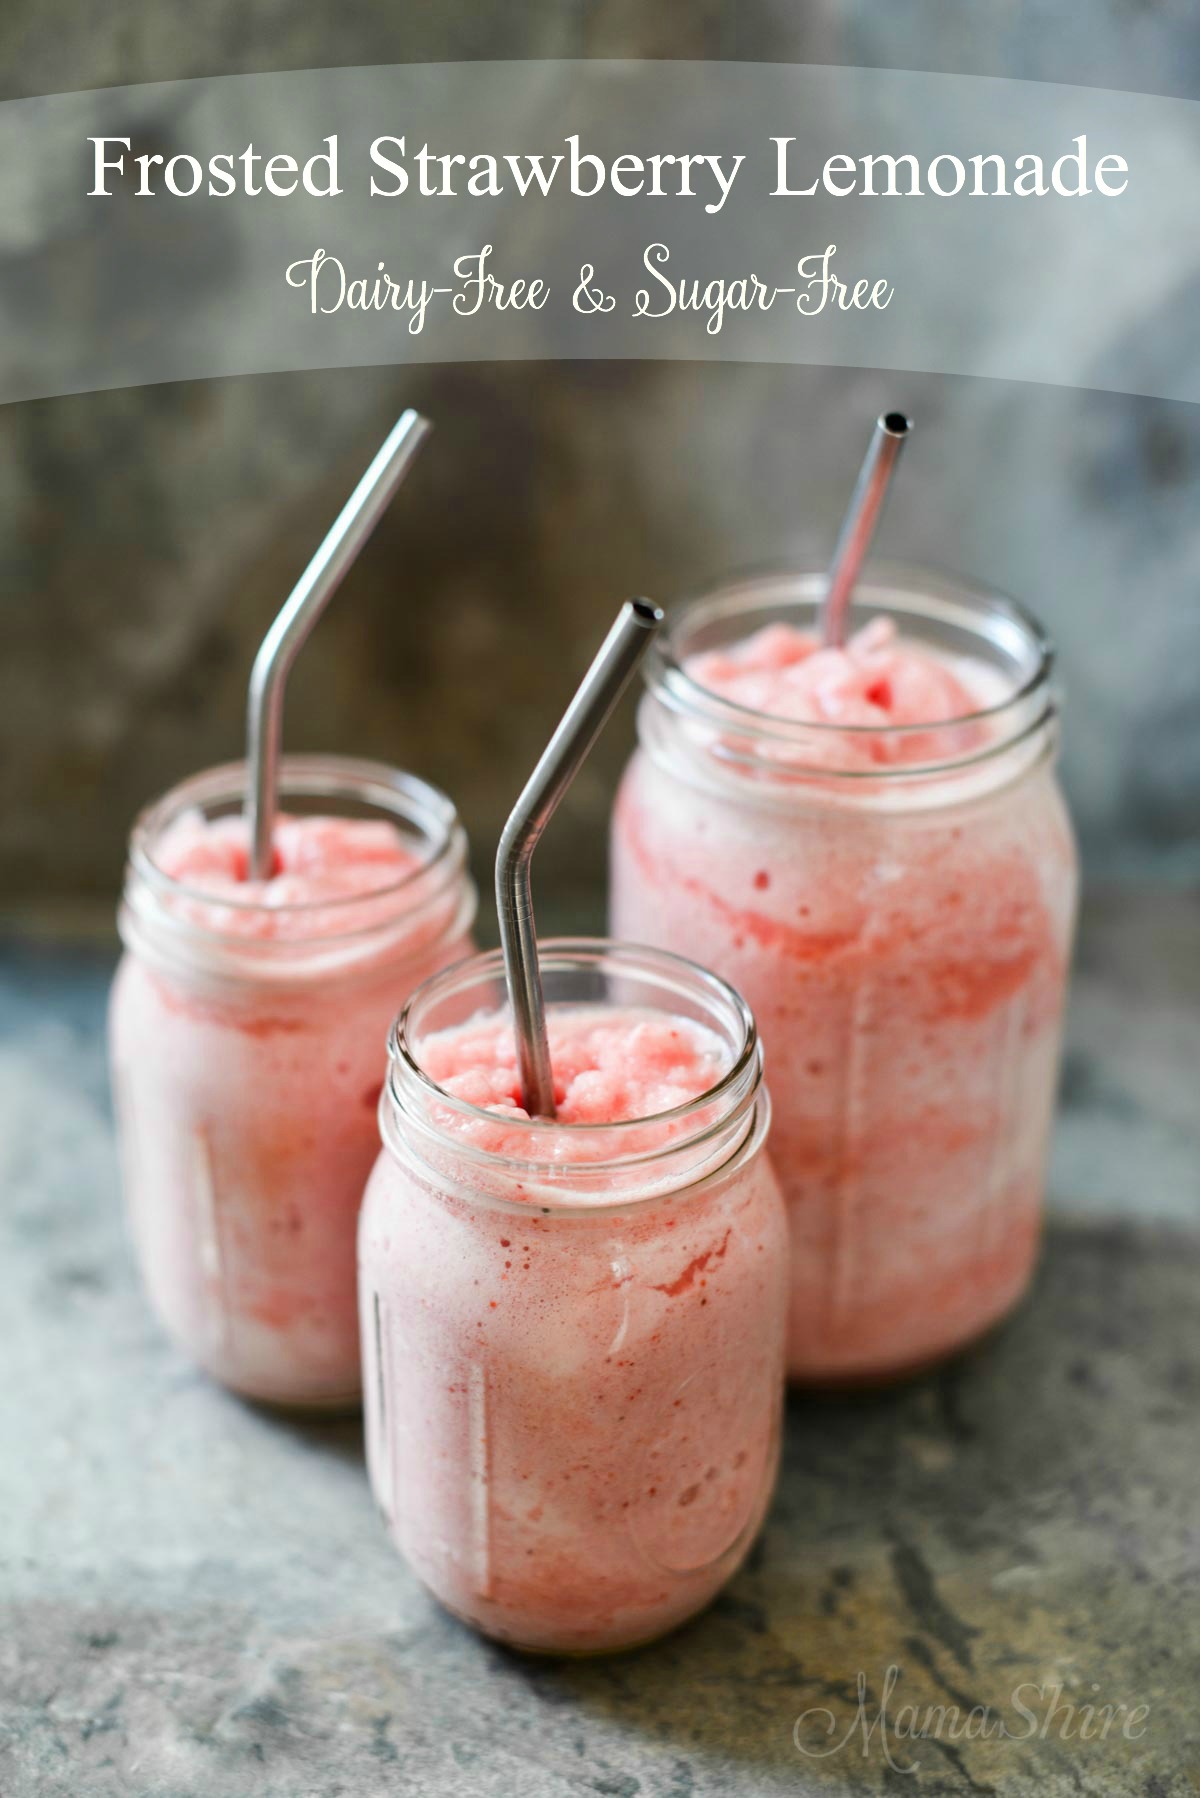 Frosted Strawberry Lemonade - dairy and sugar free.